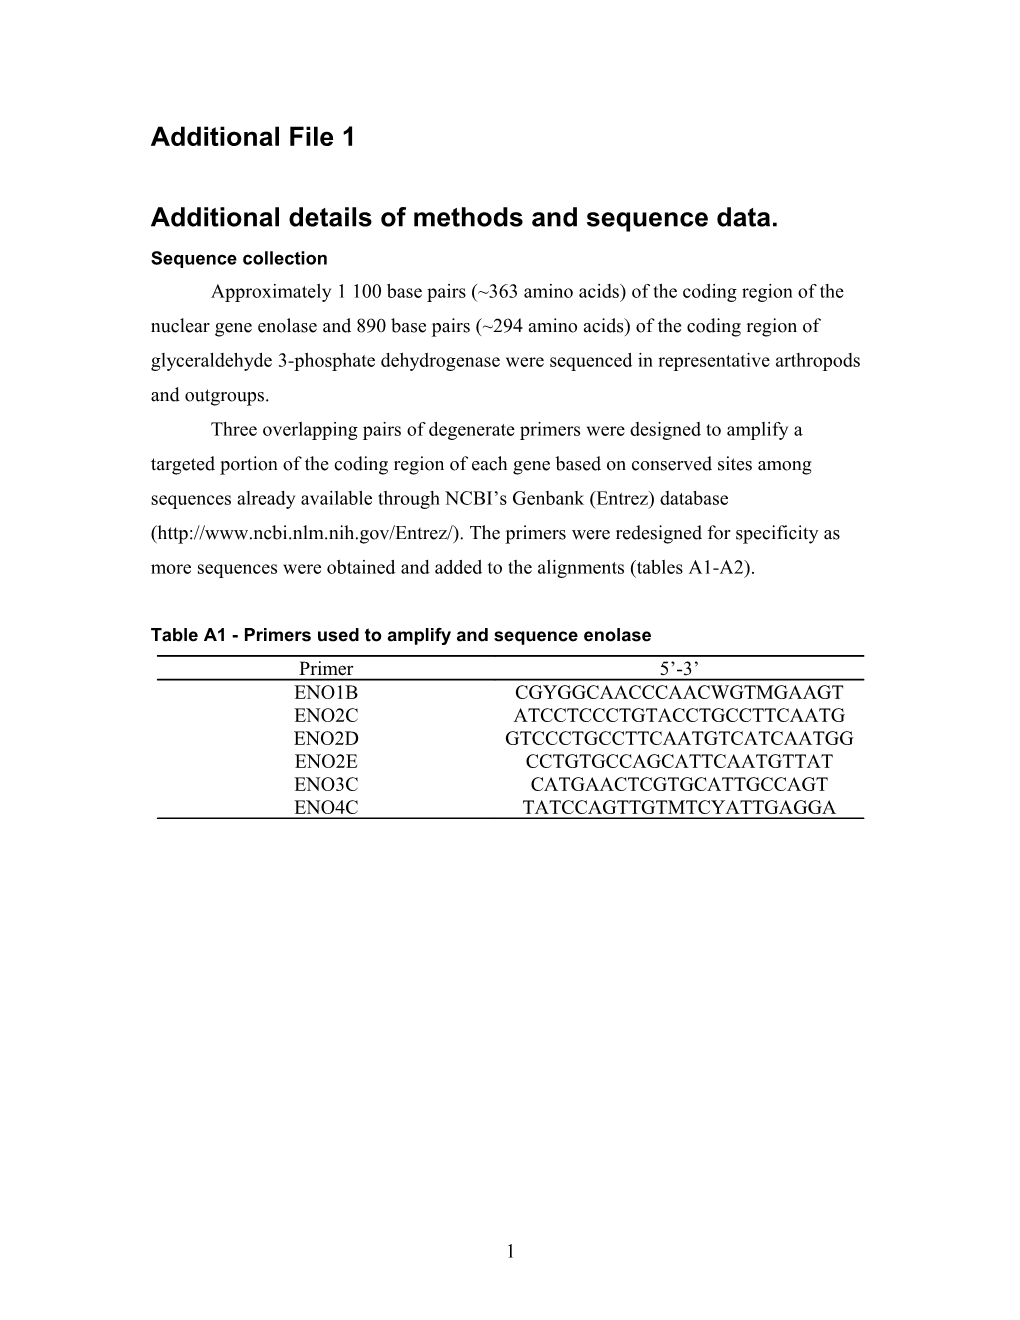 Additional Details of Methods and Sequence Data